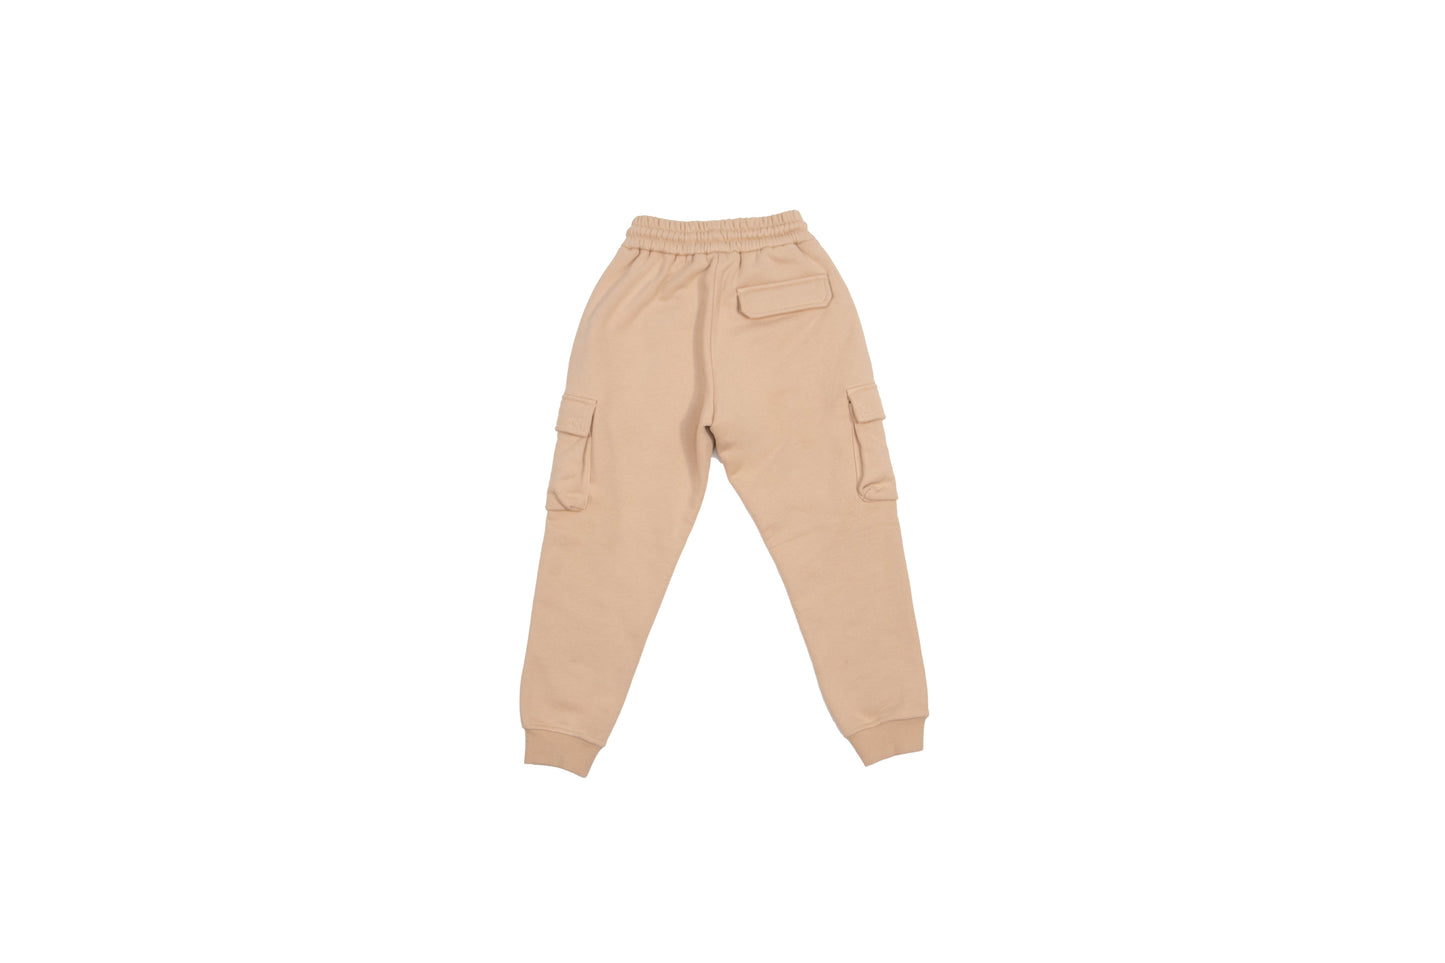 Sweatpant in Sand (PREORDER) Adult